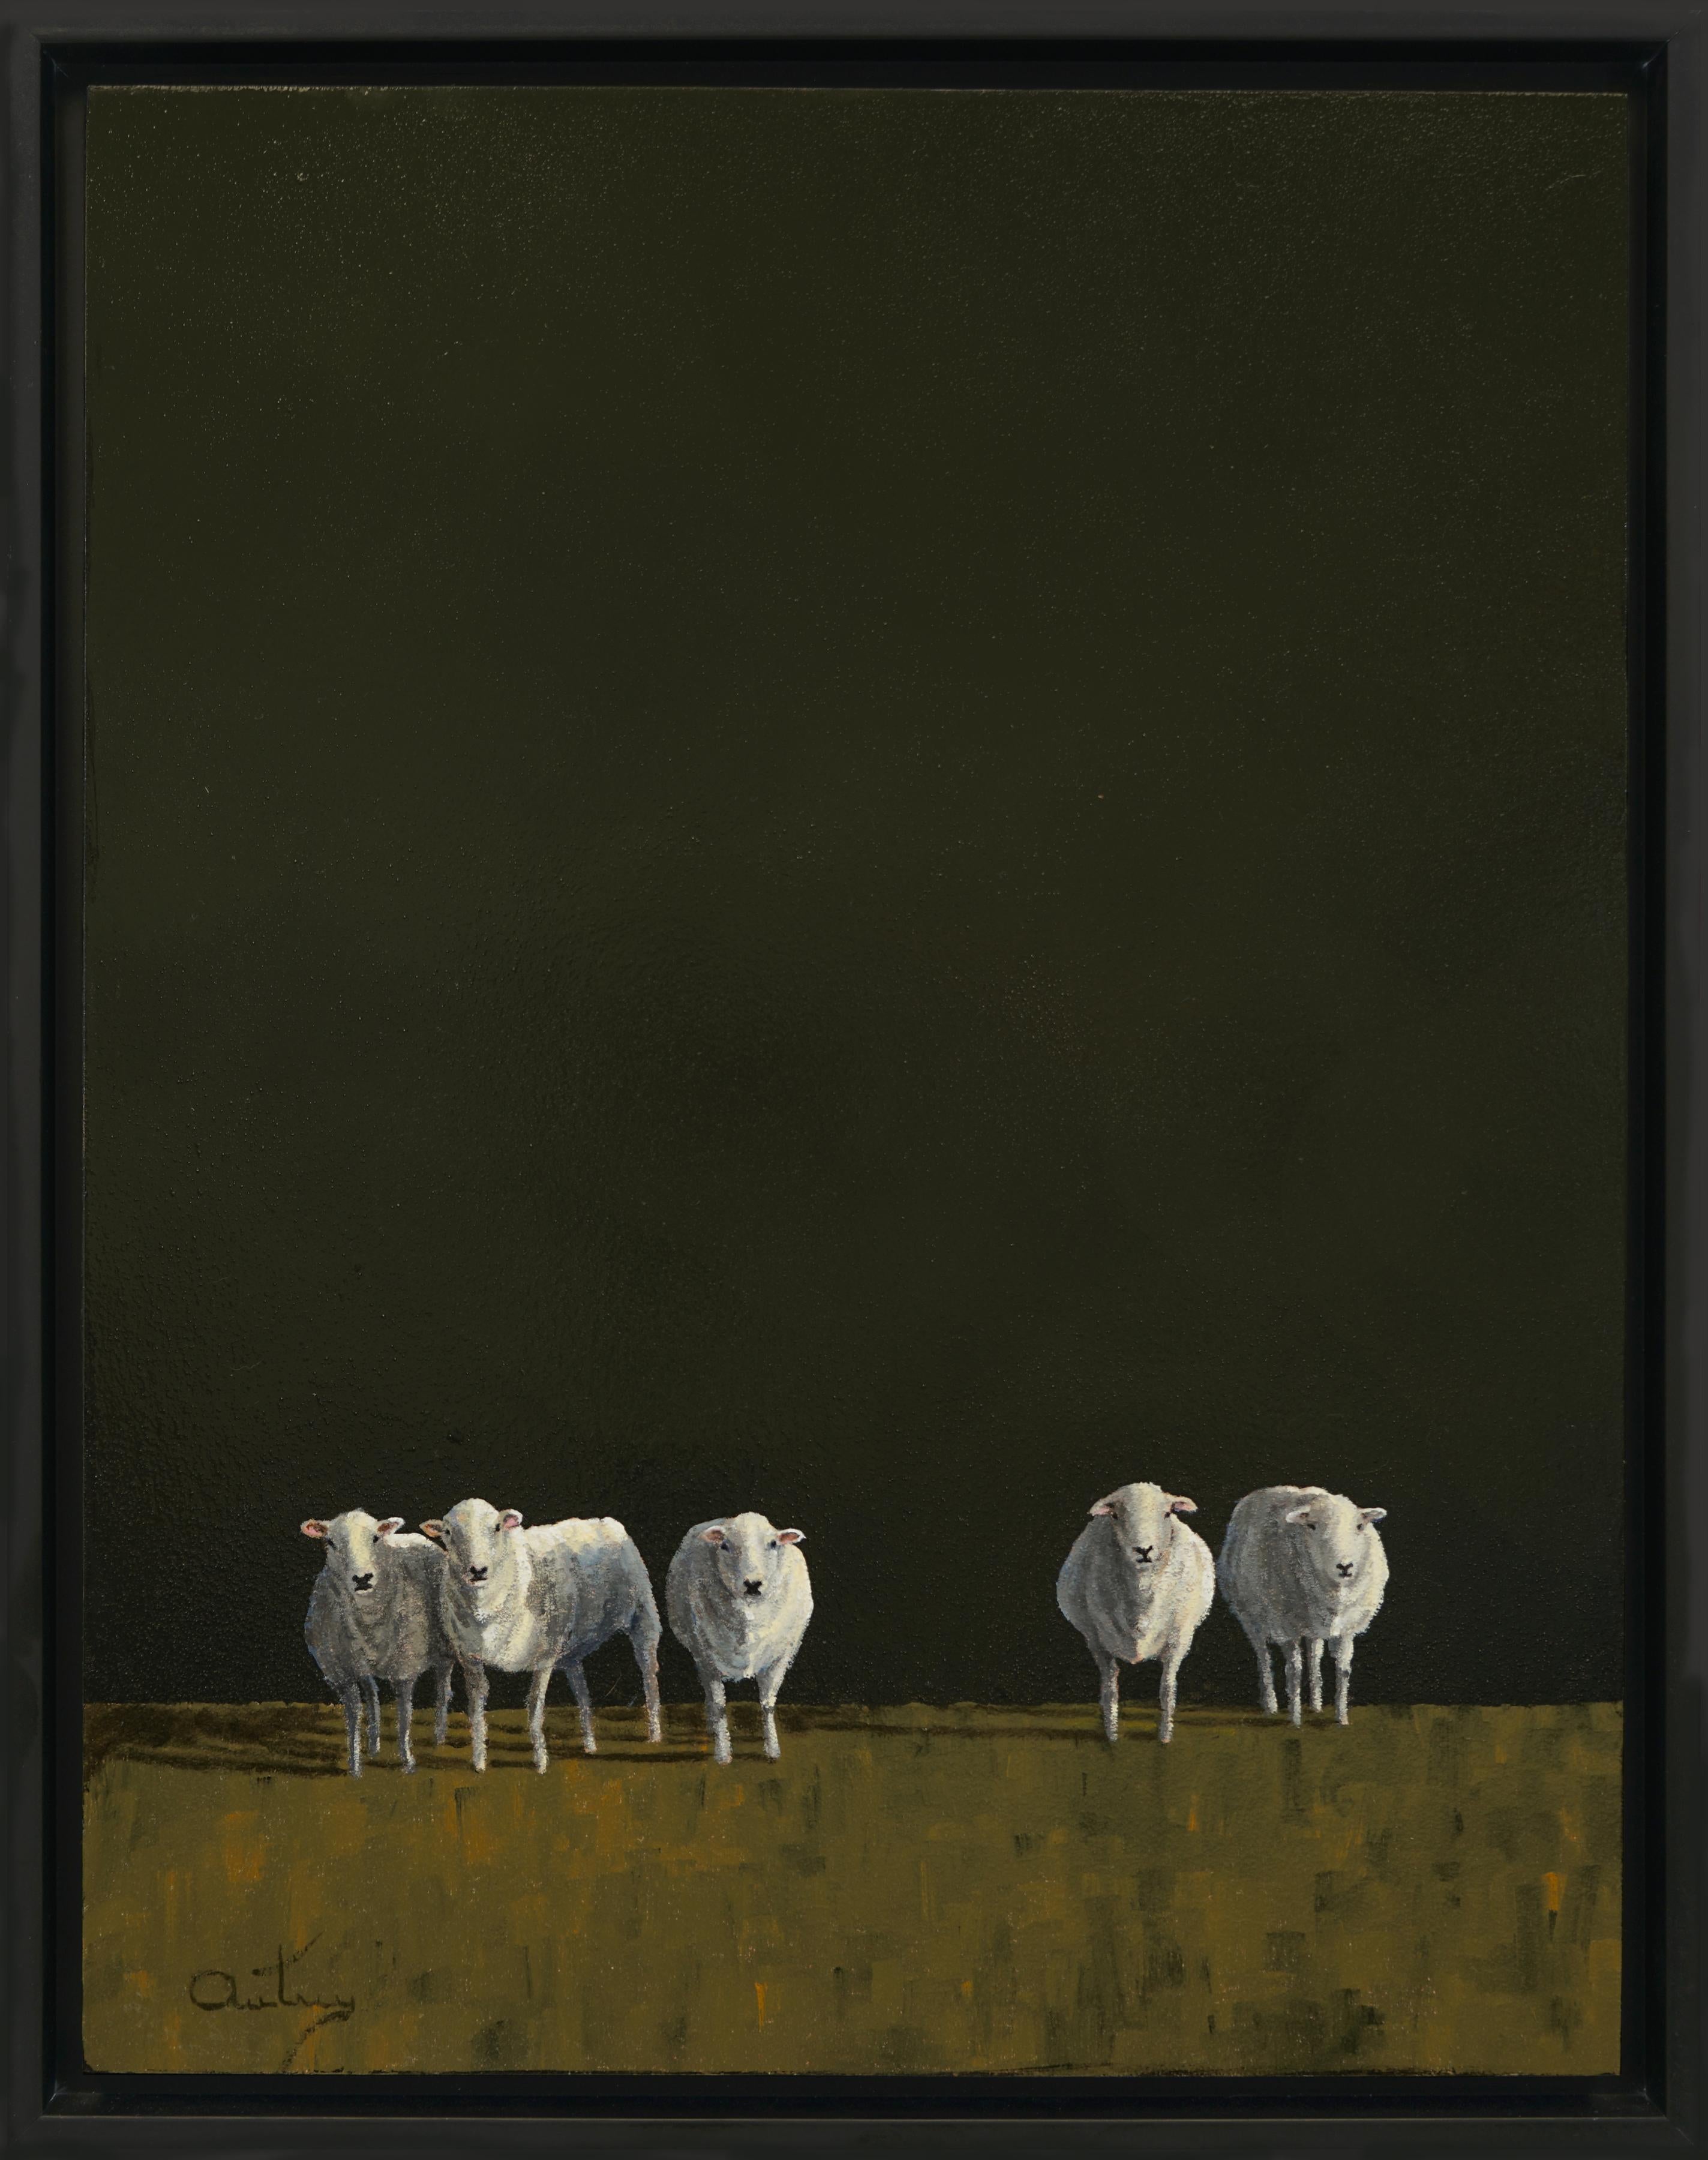 A GATHERING  Realist  Light and  Shadow, Sheep  Ovis (Latin) Oil on Panel - American Realist Painting by Luke Autrey